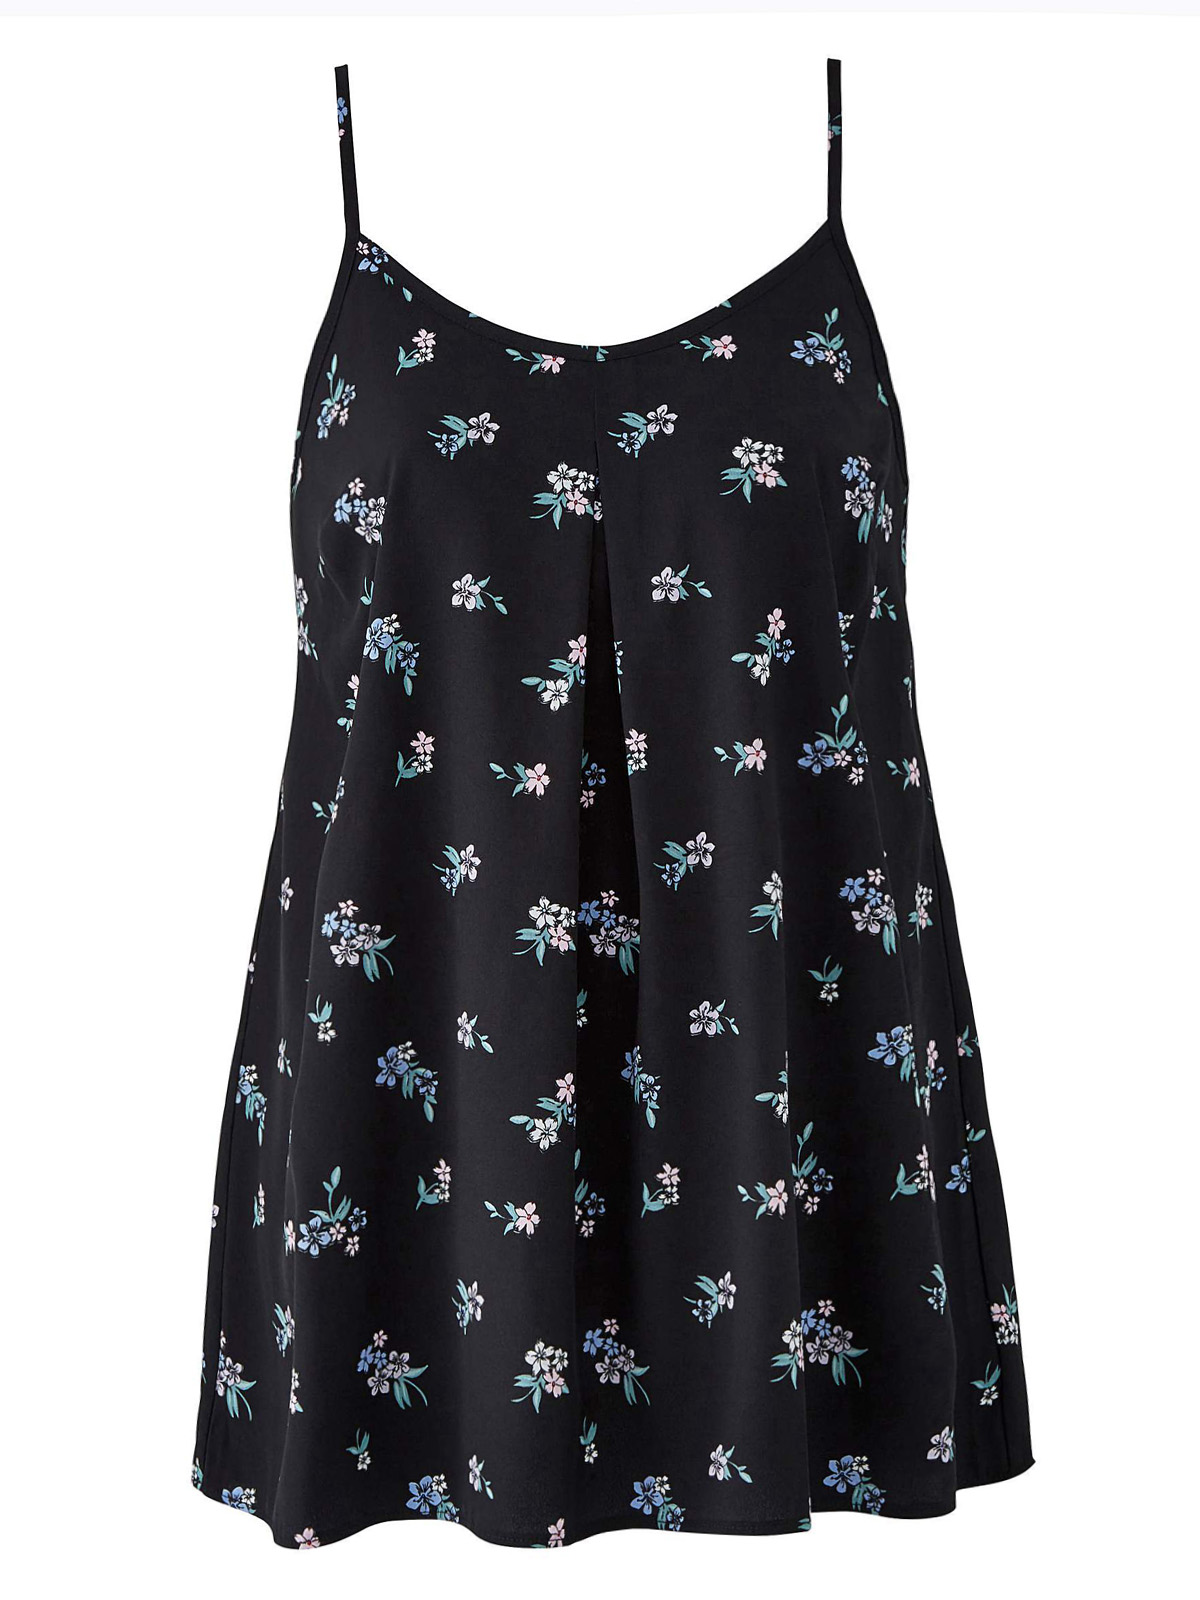 Capsule - - Capsule BLACK Floral Print Strappy Cami Top - Size 12 to 14